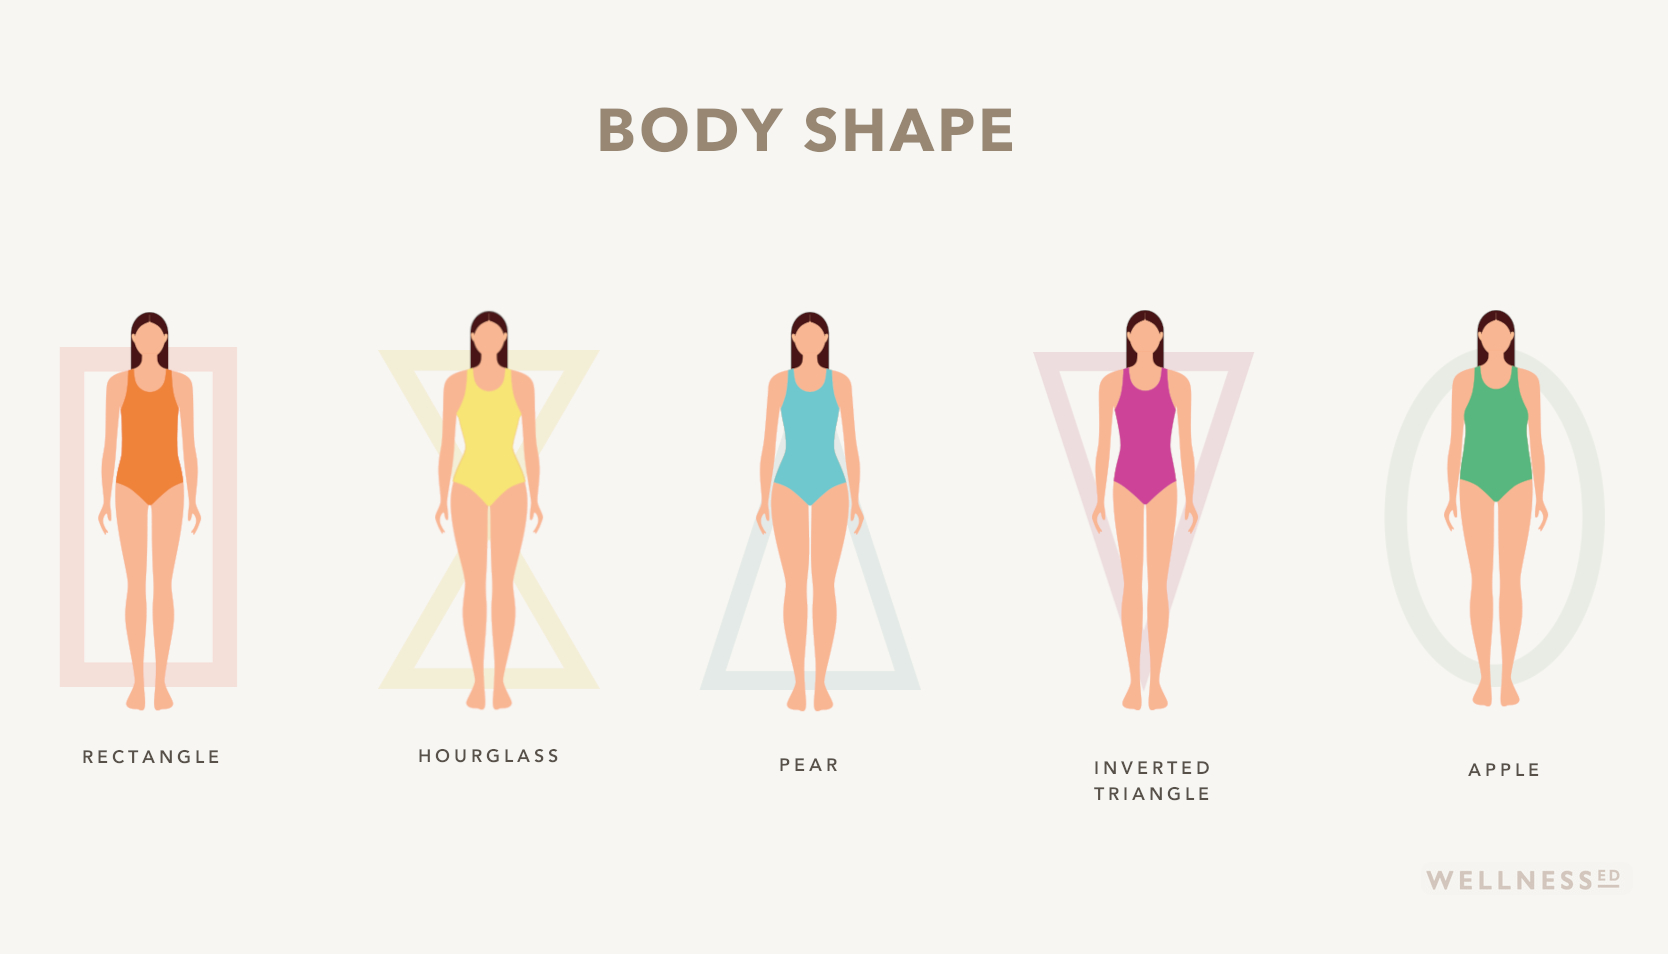 Chart of the 5 body shapes: ruler, hourglass, pear, inverted triangle, and apple shape